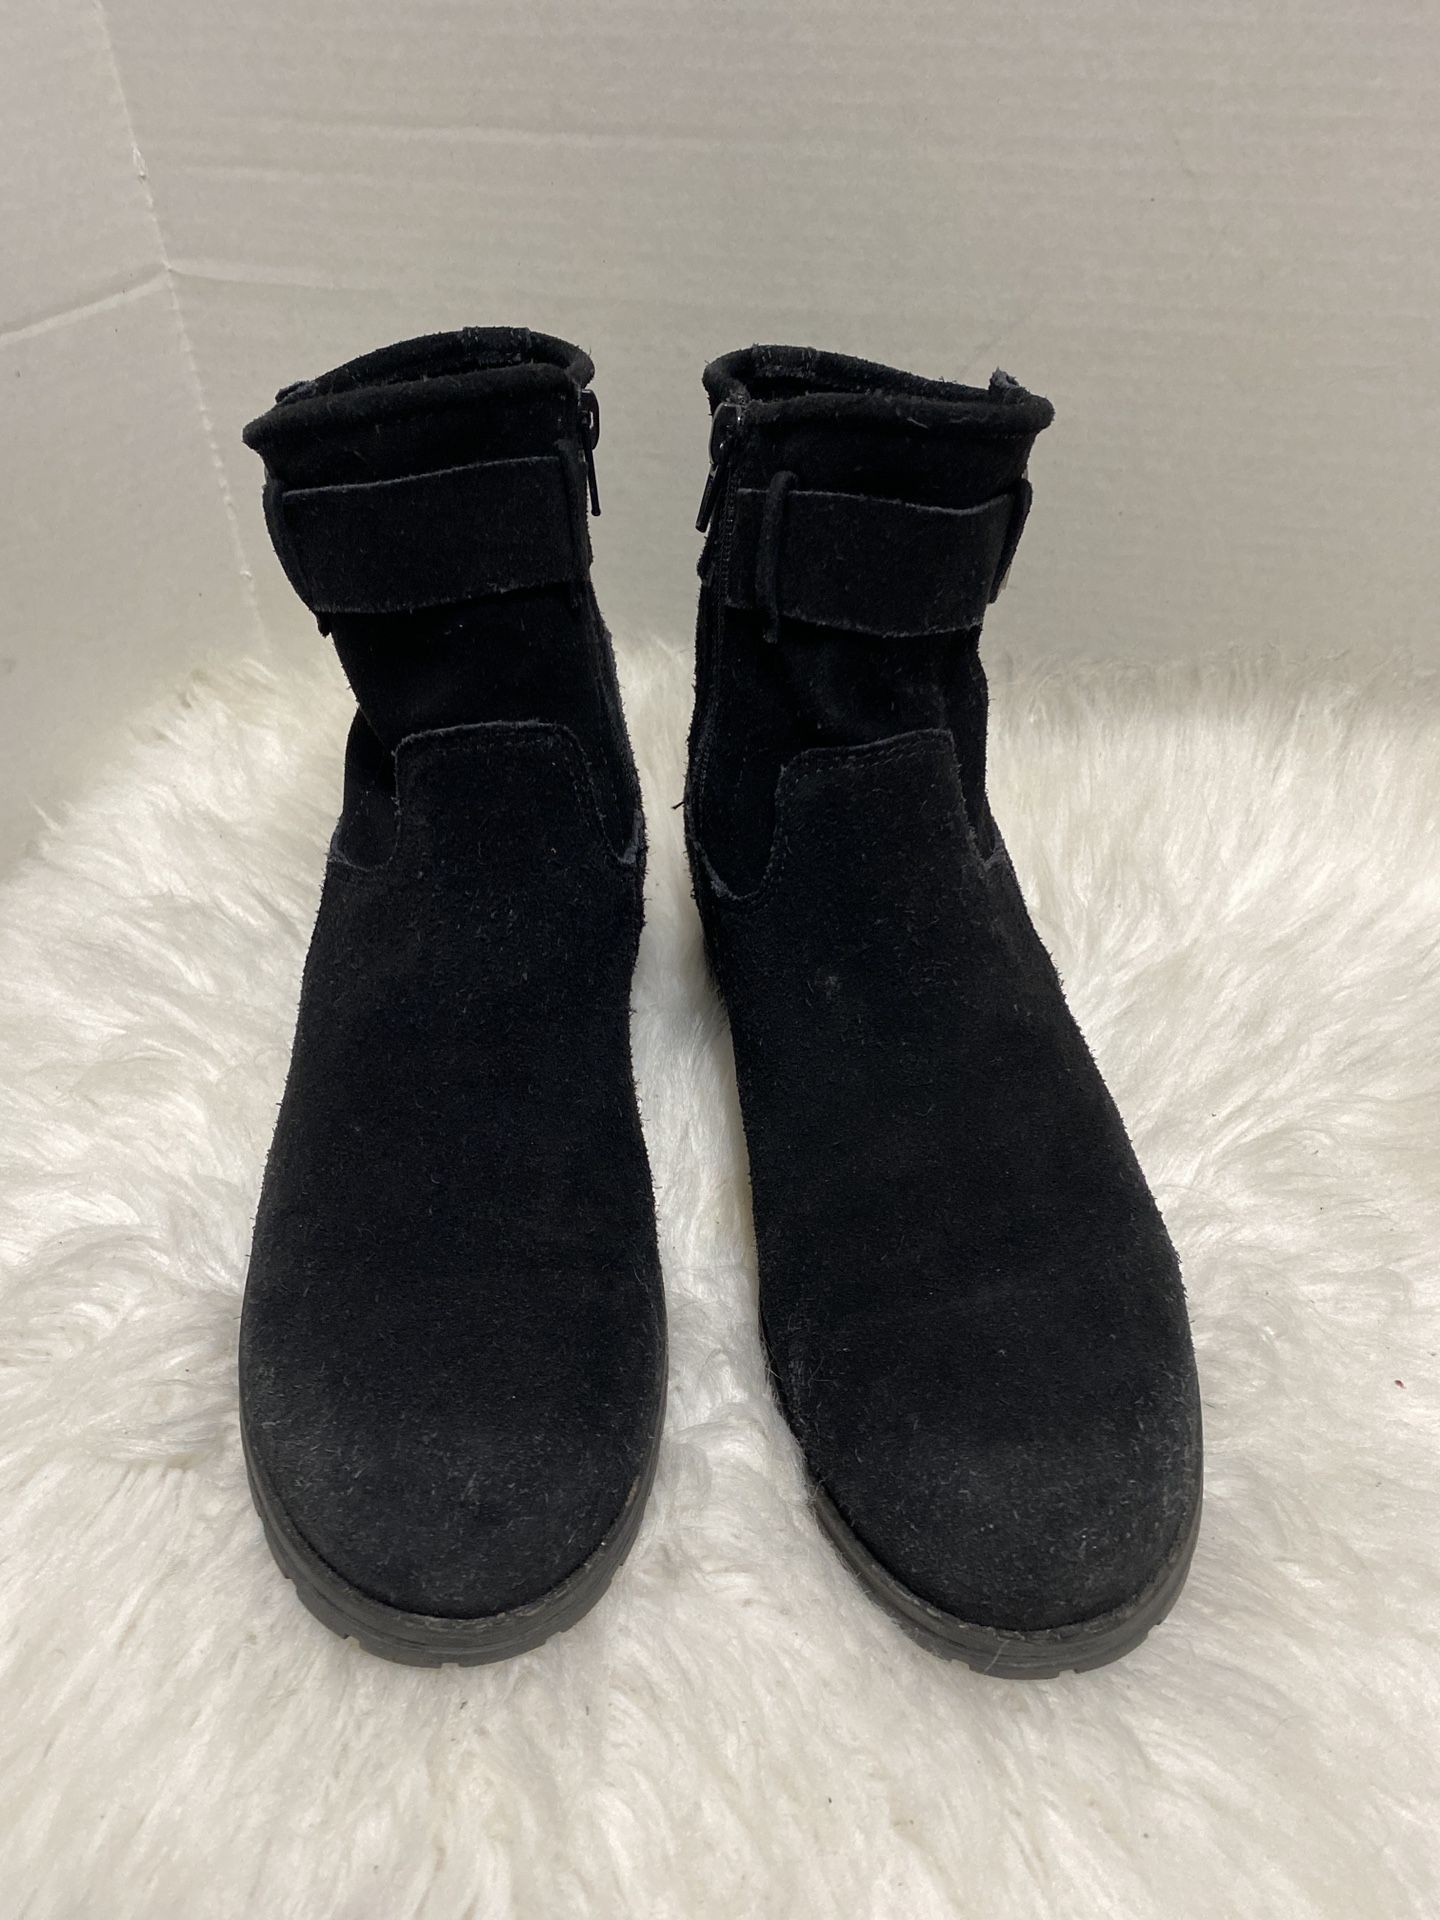 CLARKS Women's Black  Suede Ankle Boots Booties Buckles and Side Zipper US 8.5